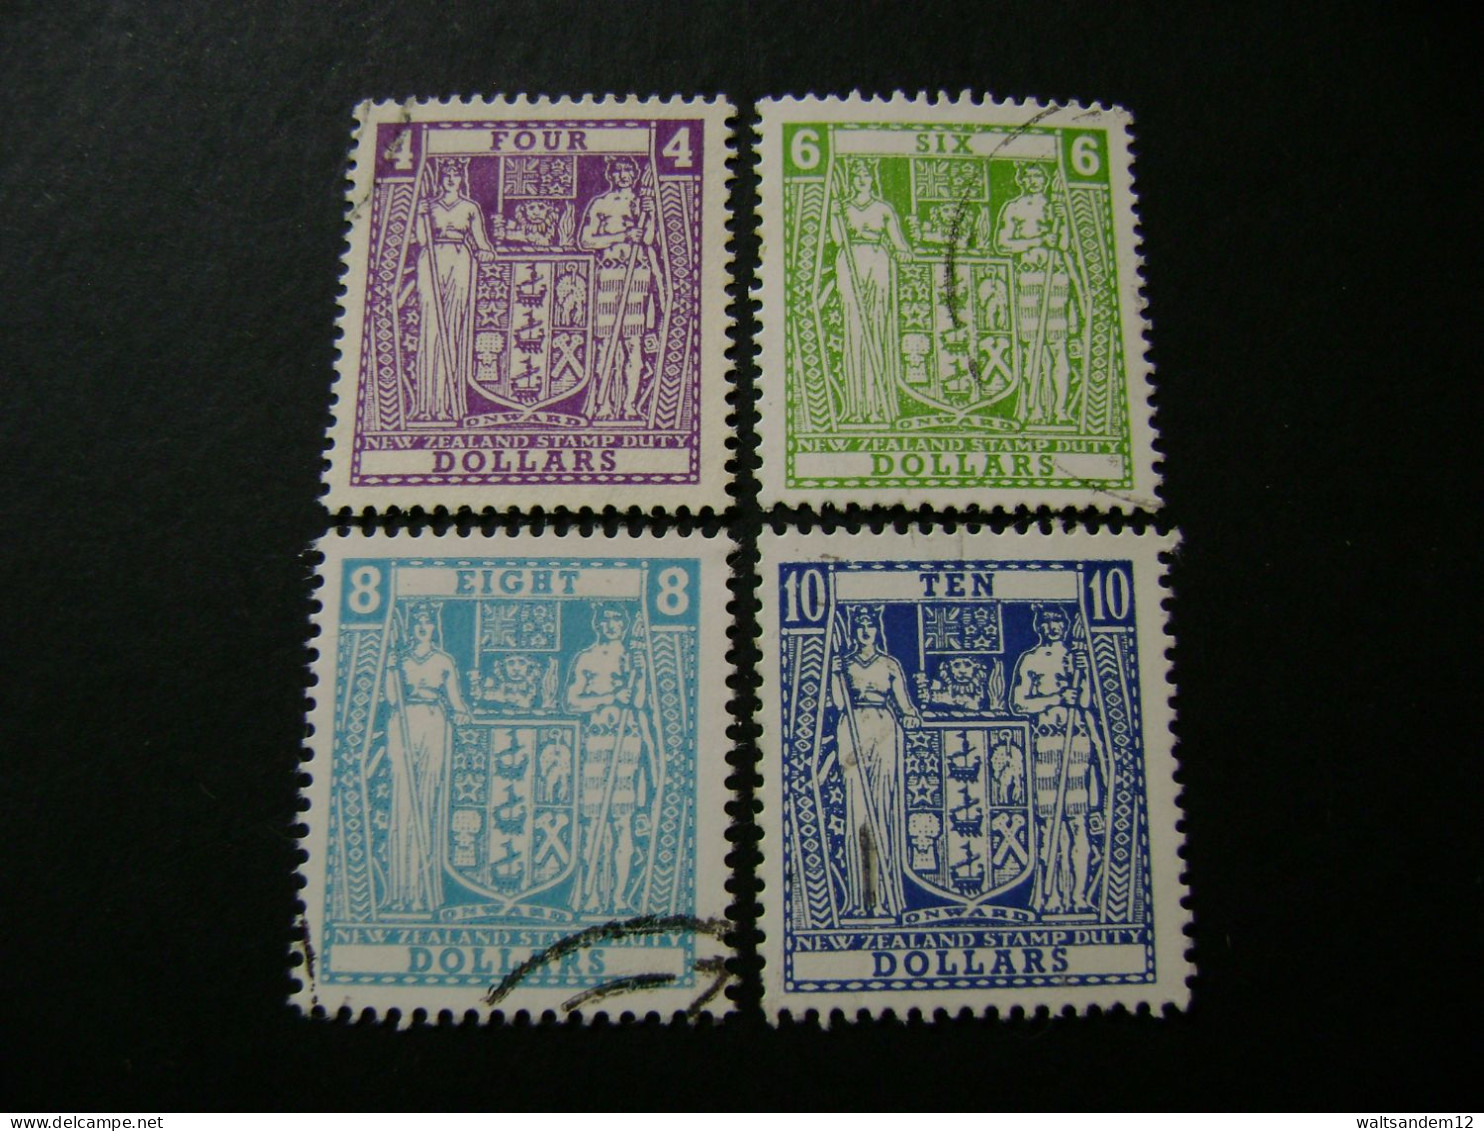 New Zealand 1967 Decimal Arms $4, $6, $8, $10 Definitives (SG F219-F222) - Used - Postal Fiscal Stamps